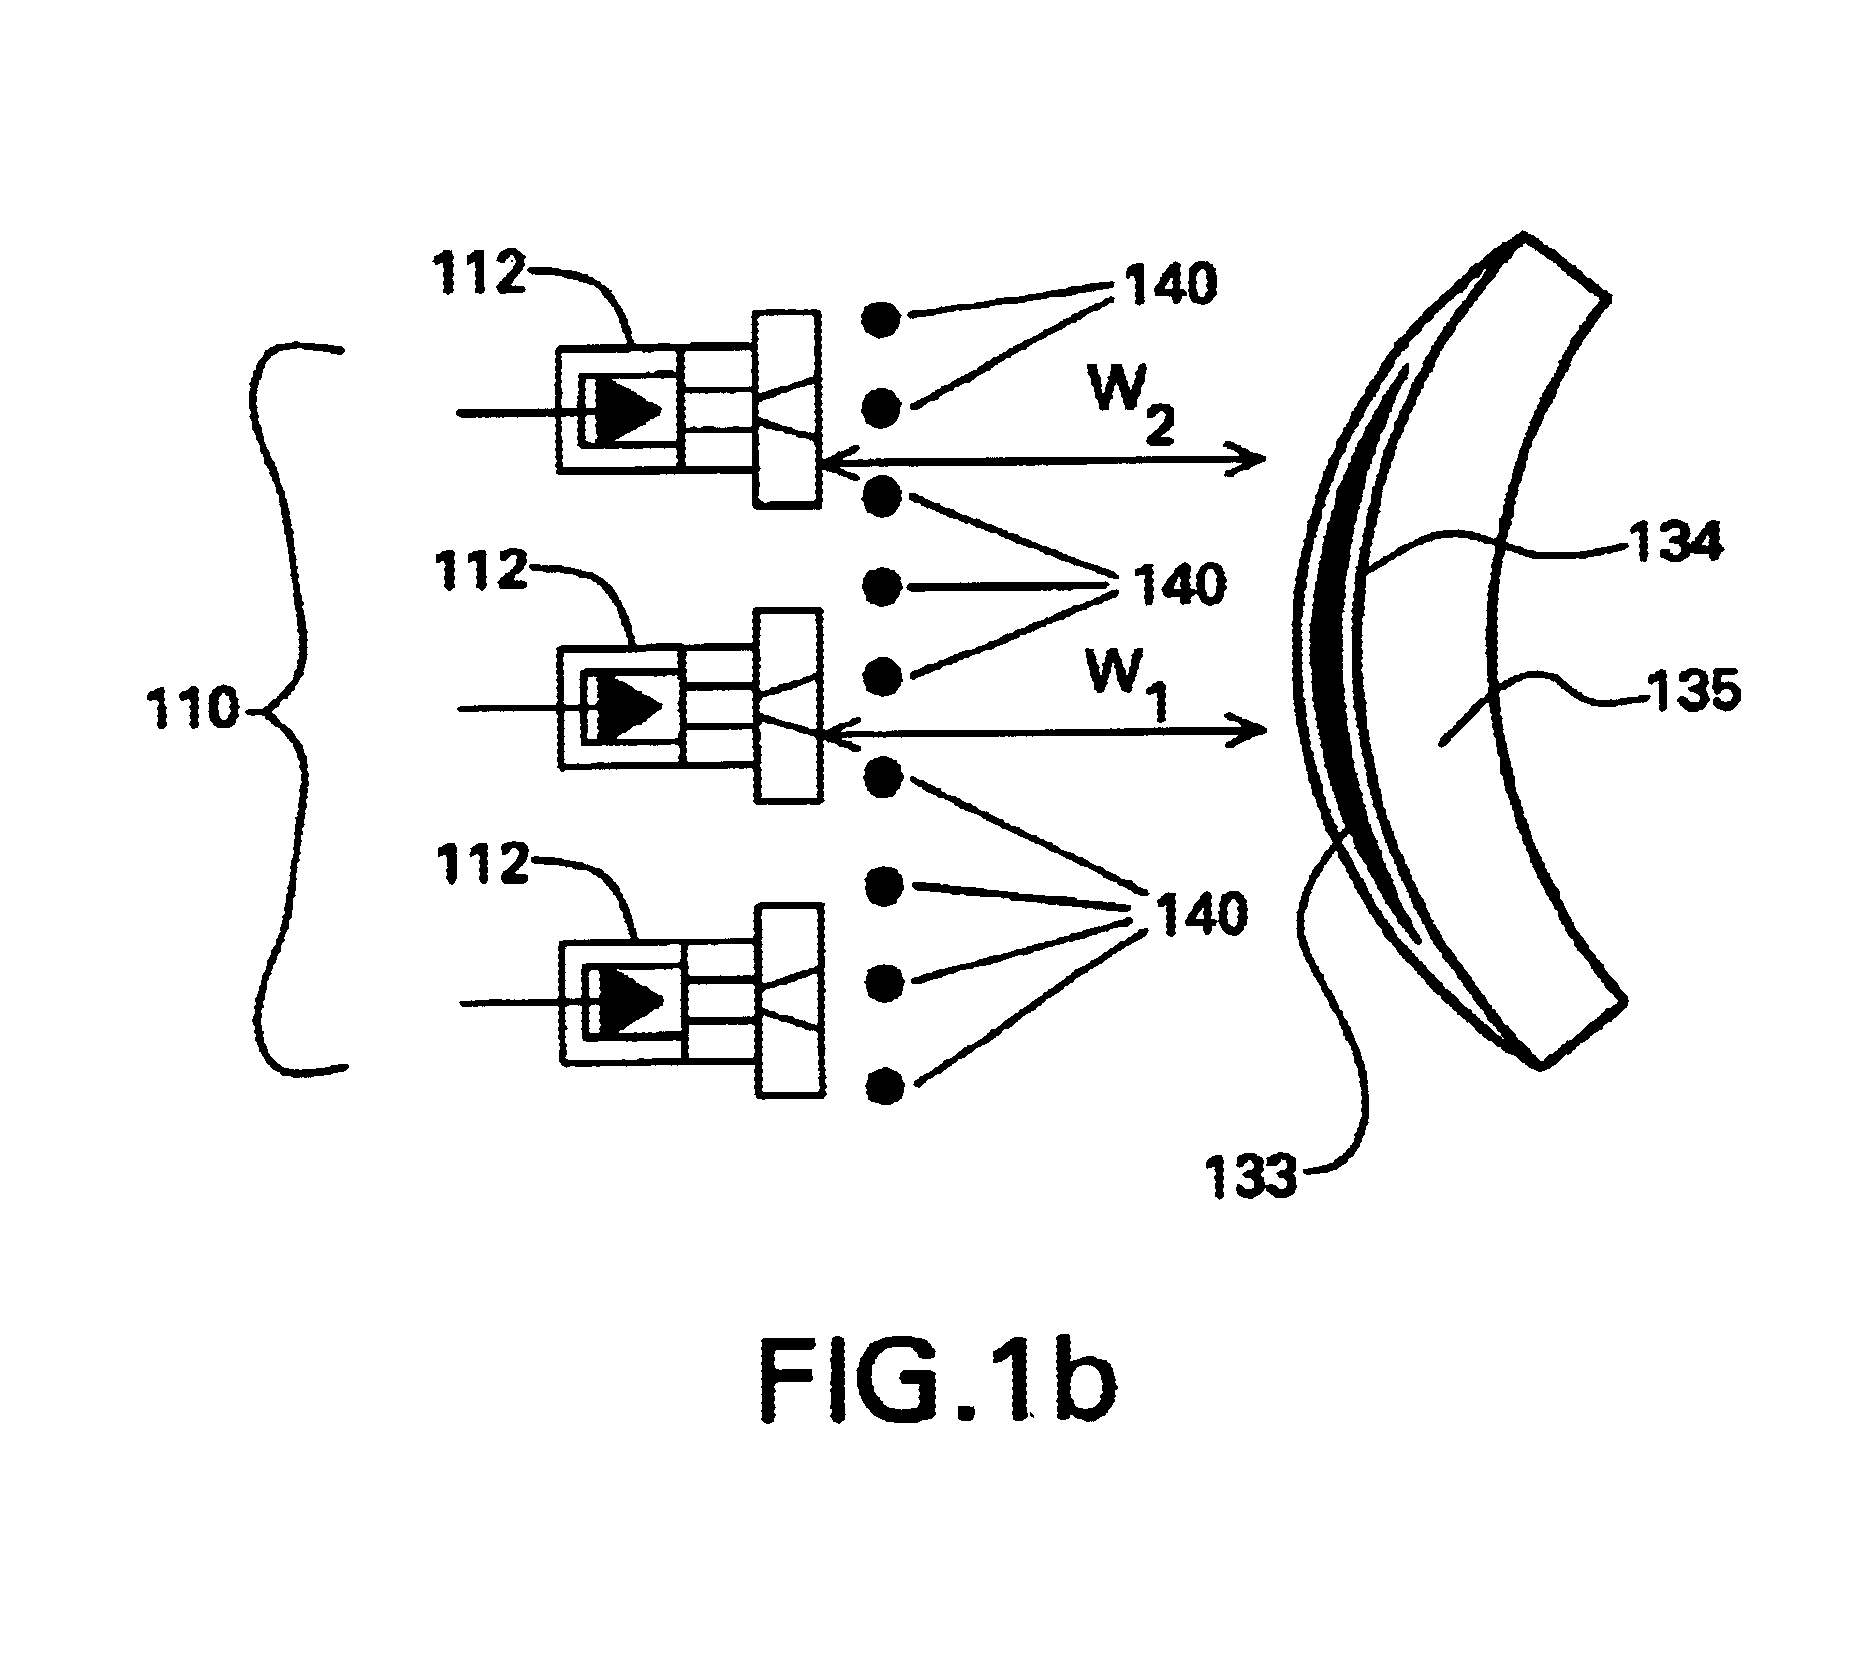 Apparatus and method for depositing large area coatings on non-planar surfaces